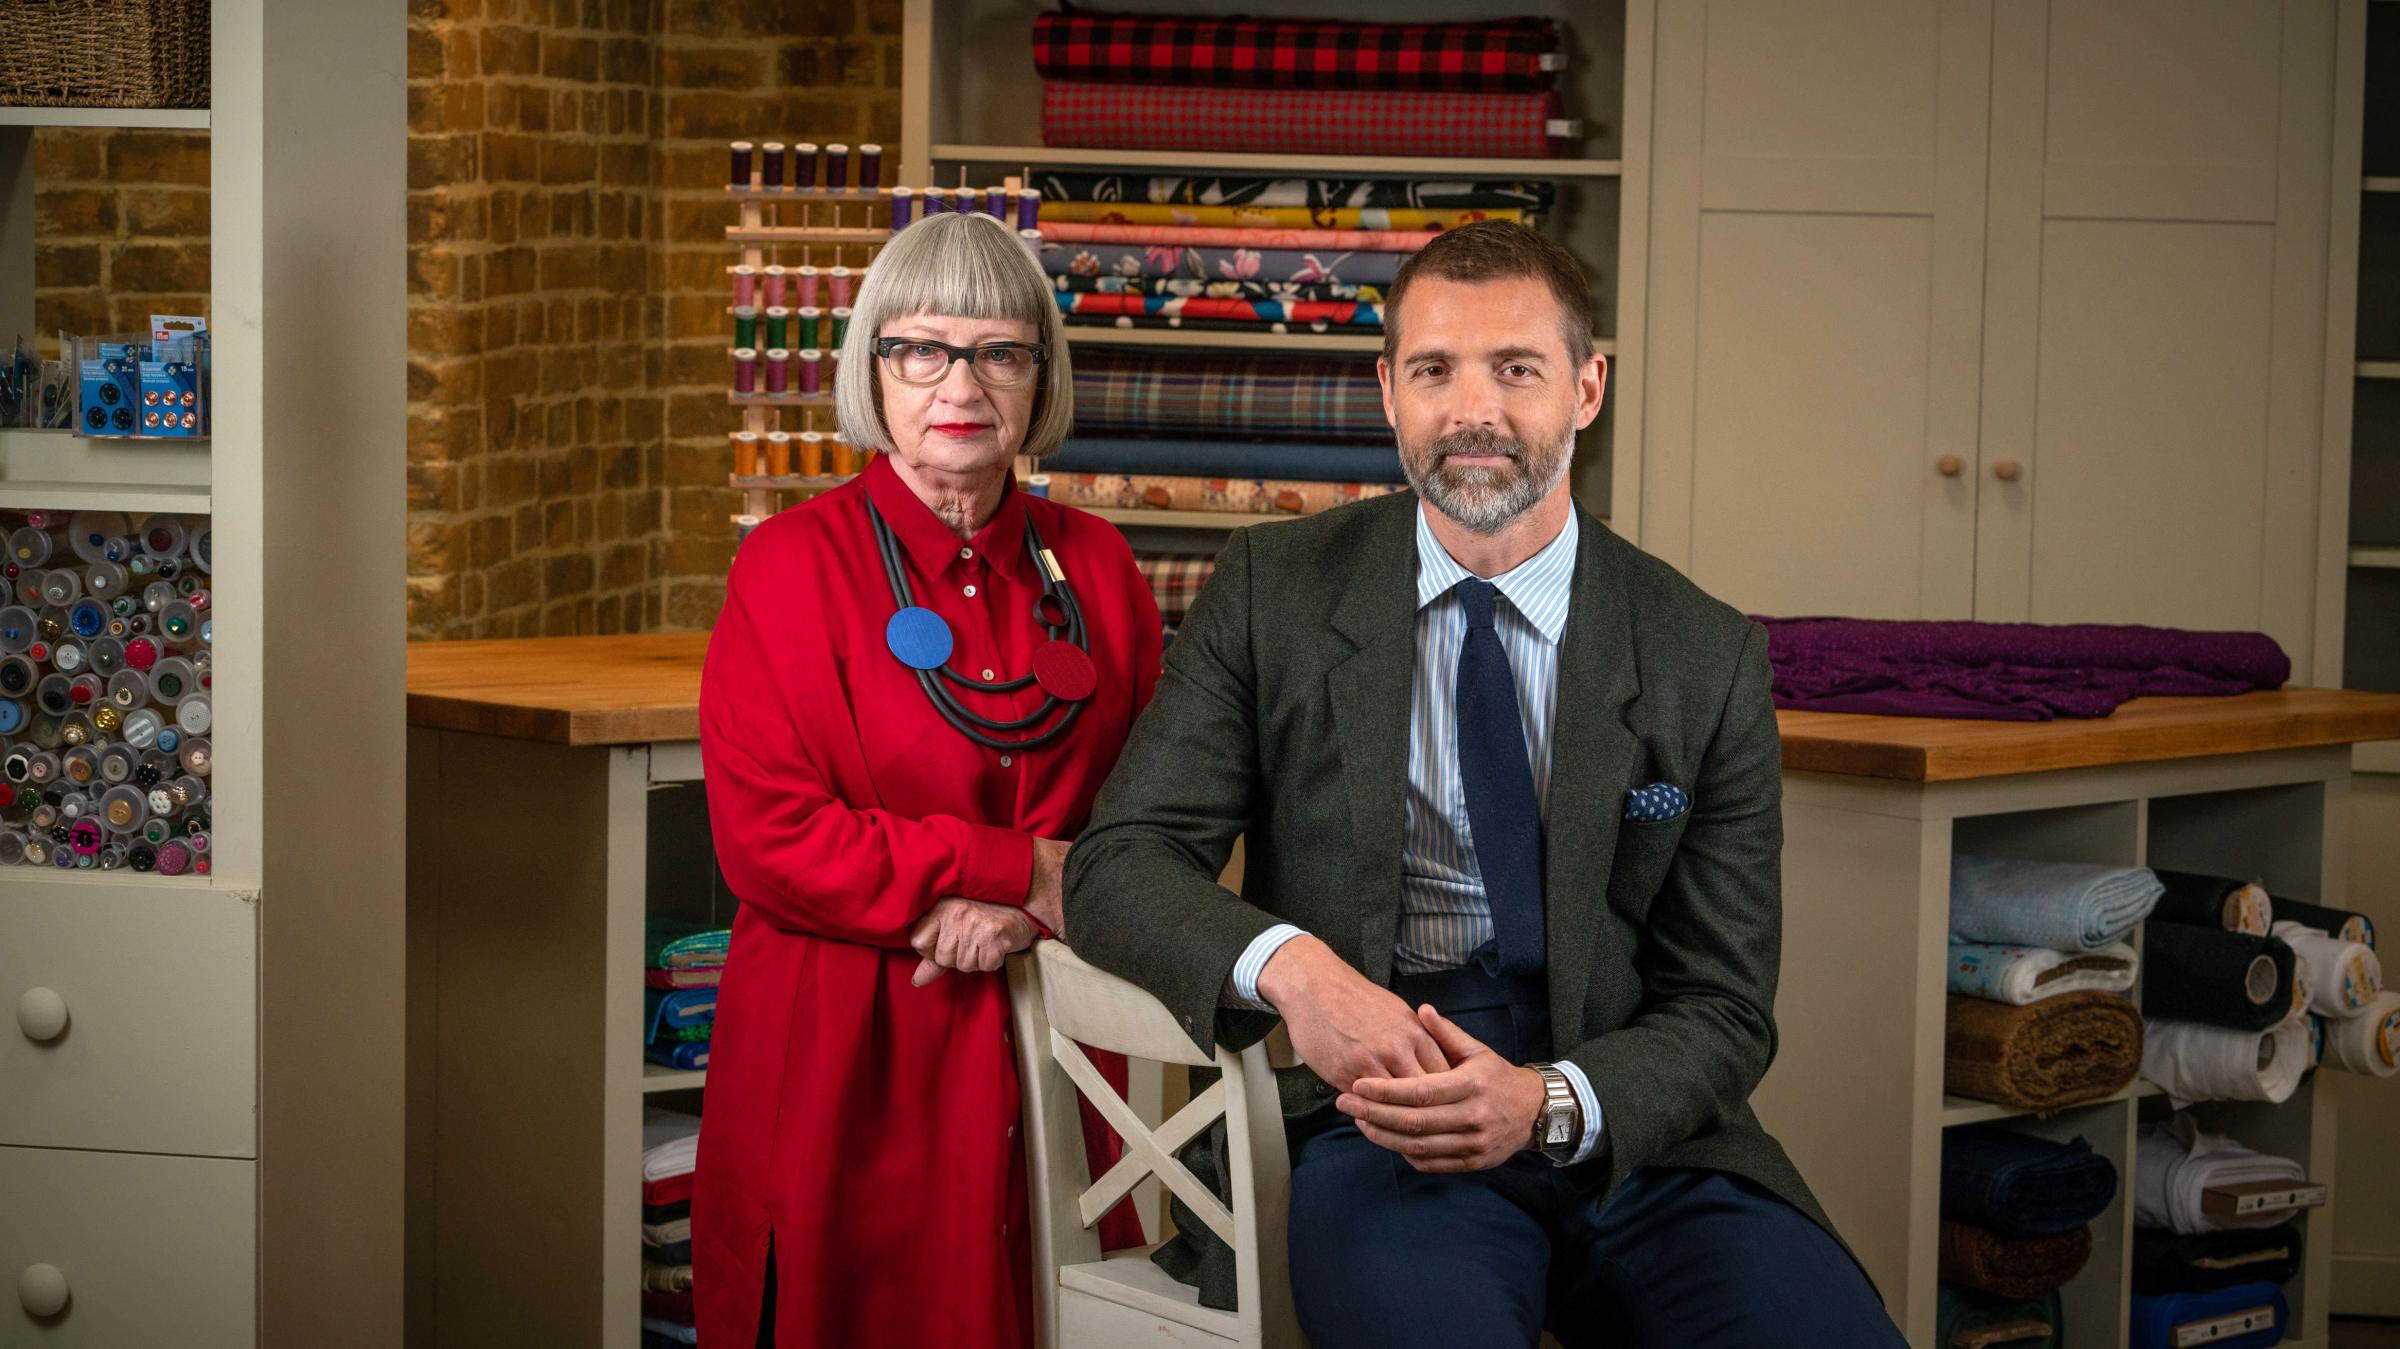 Esme Young and Patrick Grant – The Great British Sewing Bee judges